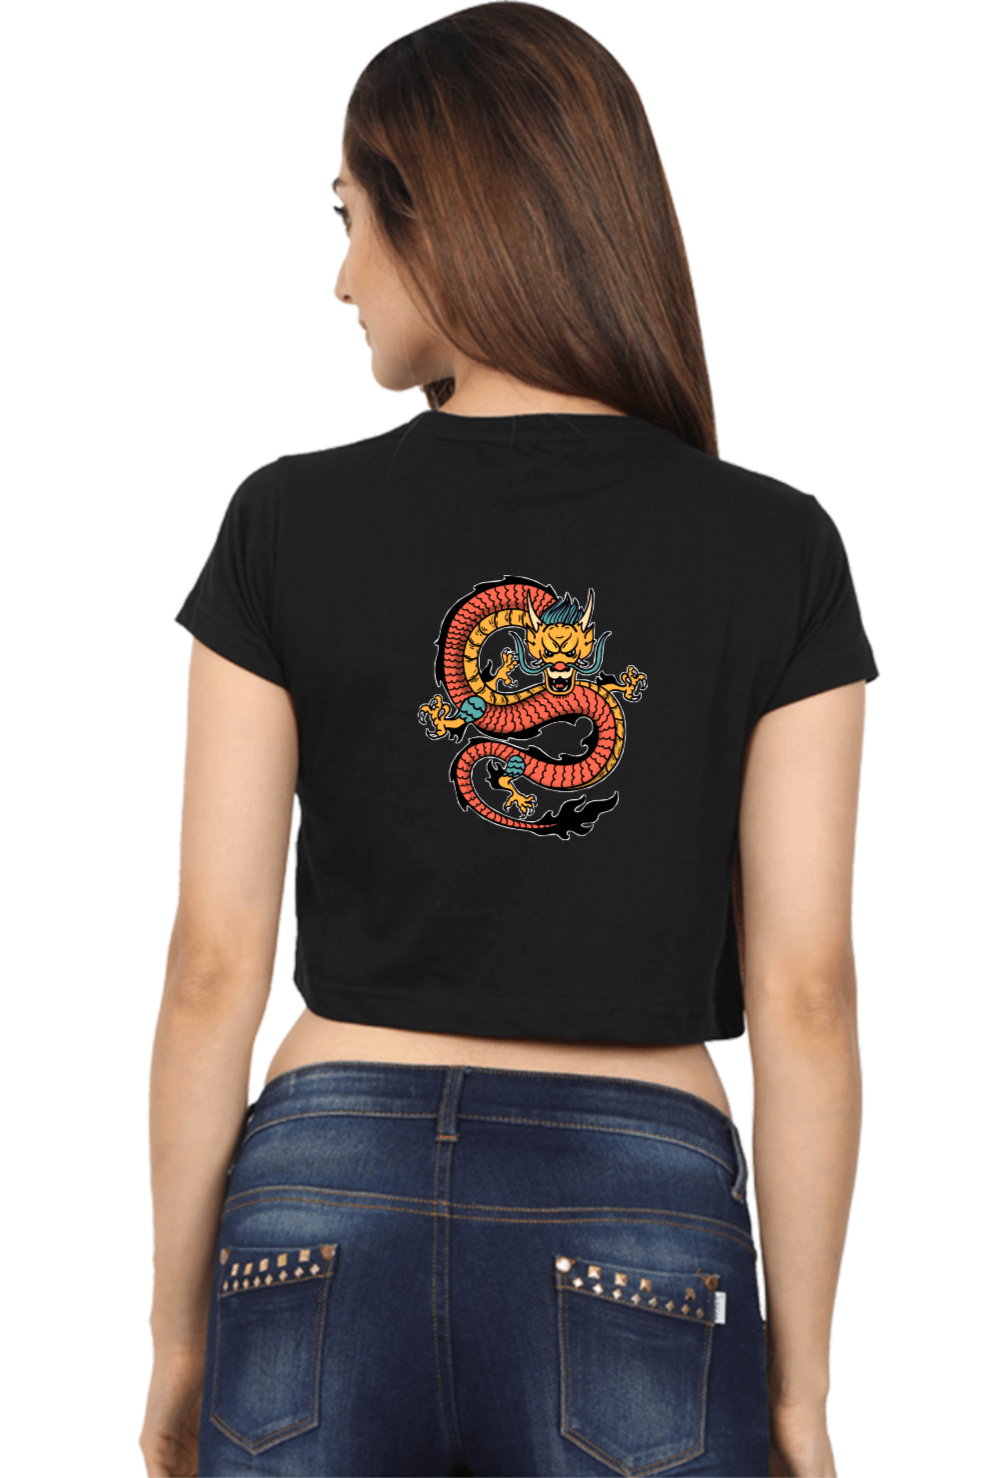 Black crop top with Dragon art print on the back